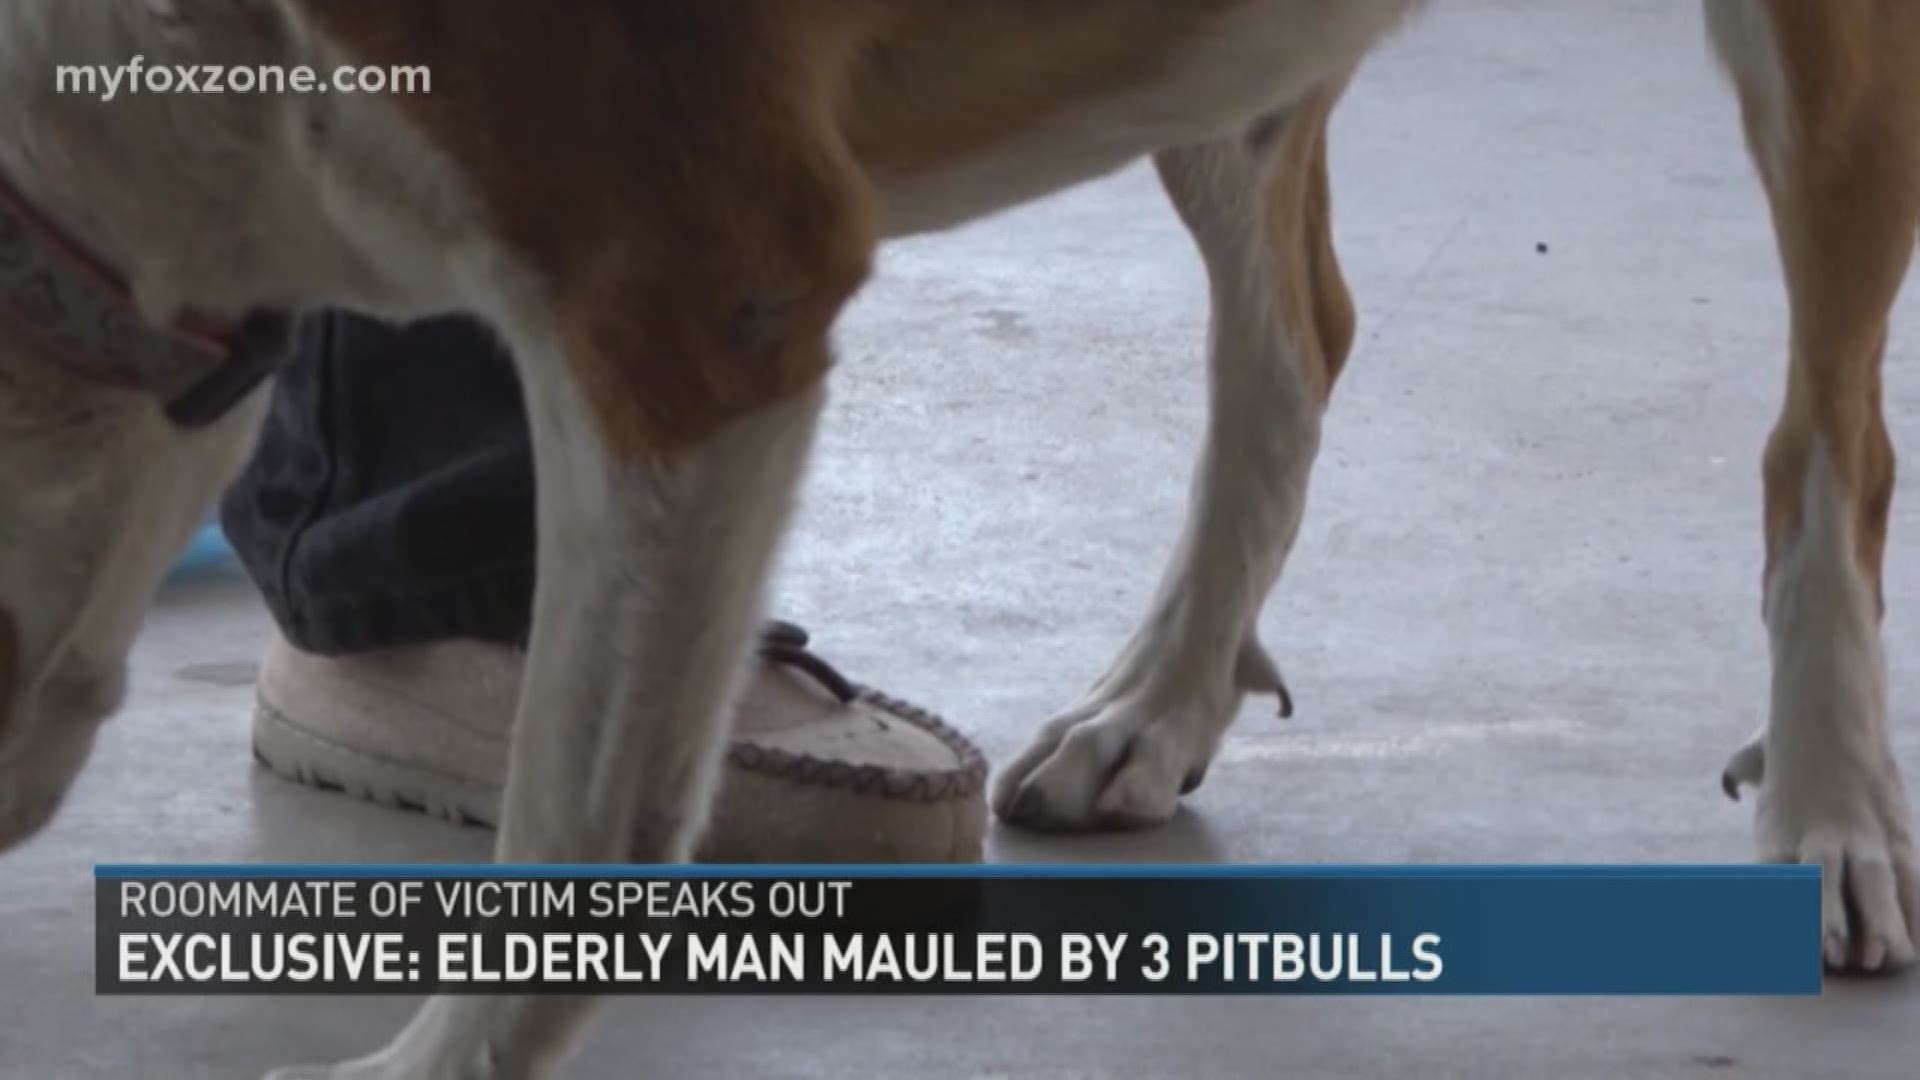 Our Brenda Matute shares an exclusive from the victims roommate who was home when the pitbulls attacked.